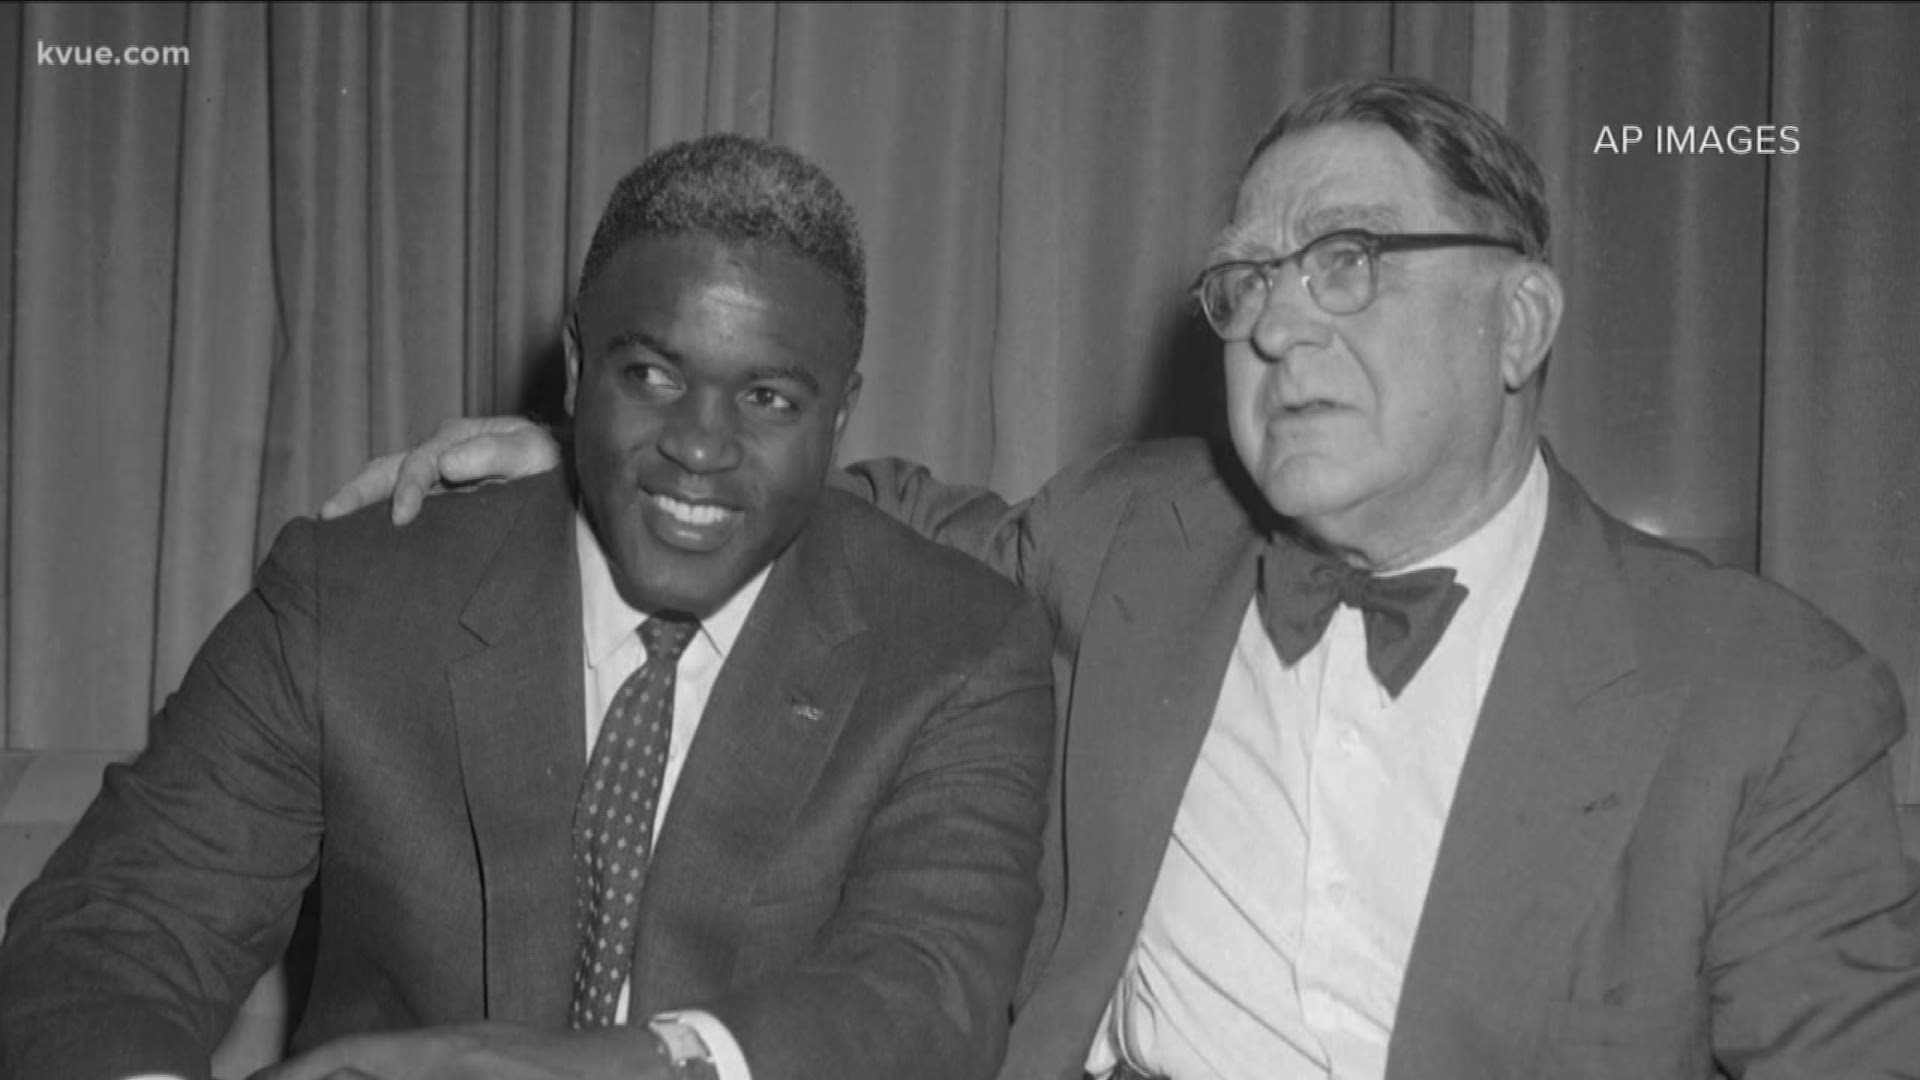 April 16 marked the 73rd anniversary of baseball legend Jackie Robinson breaking the league's color barrier.